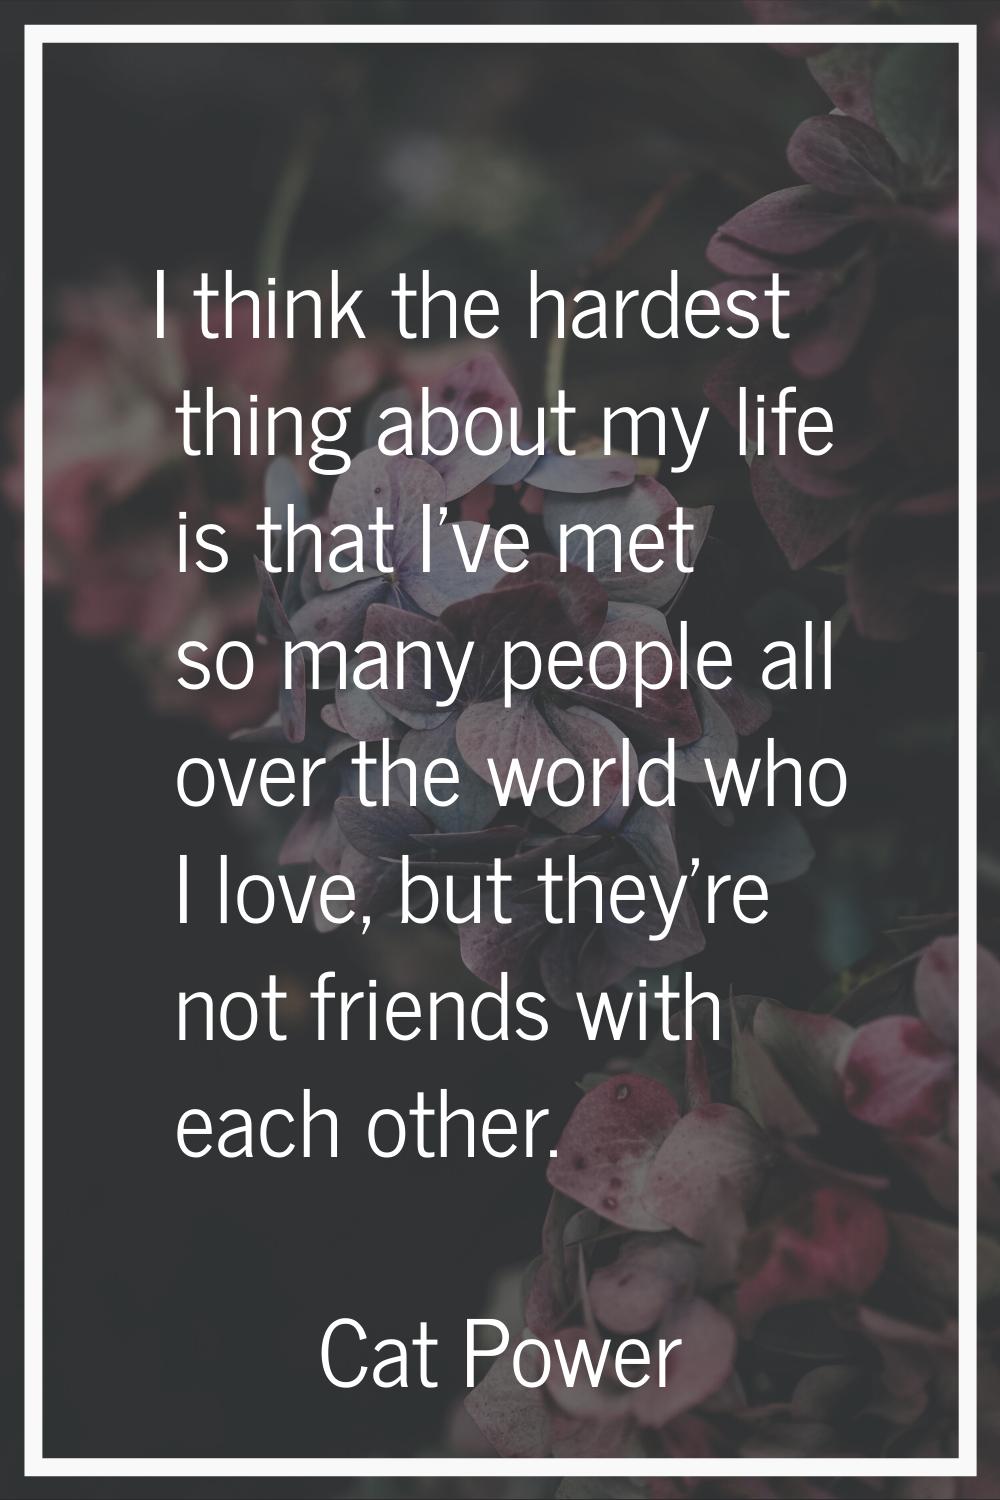 I think the hardest thing about my life is that I've met so many people all over the world who I lo